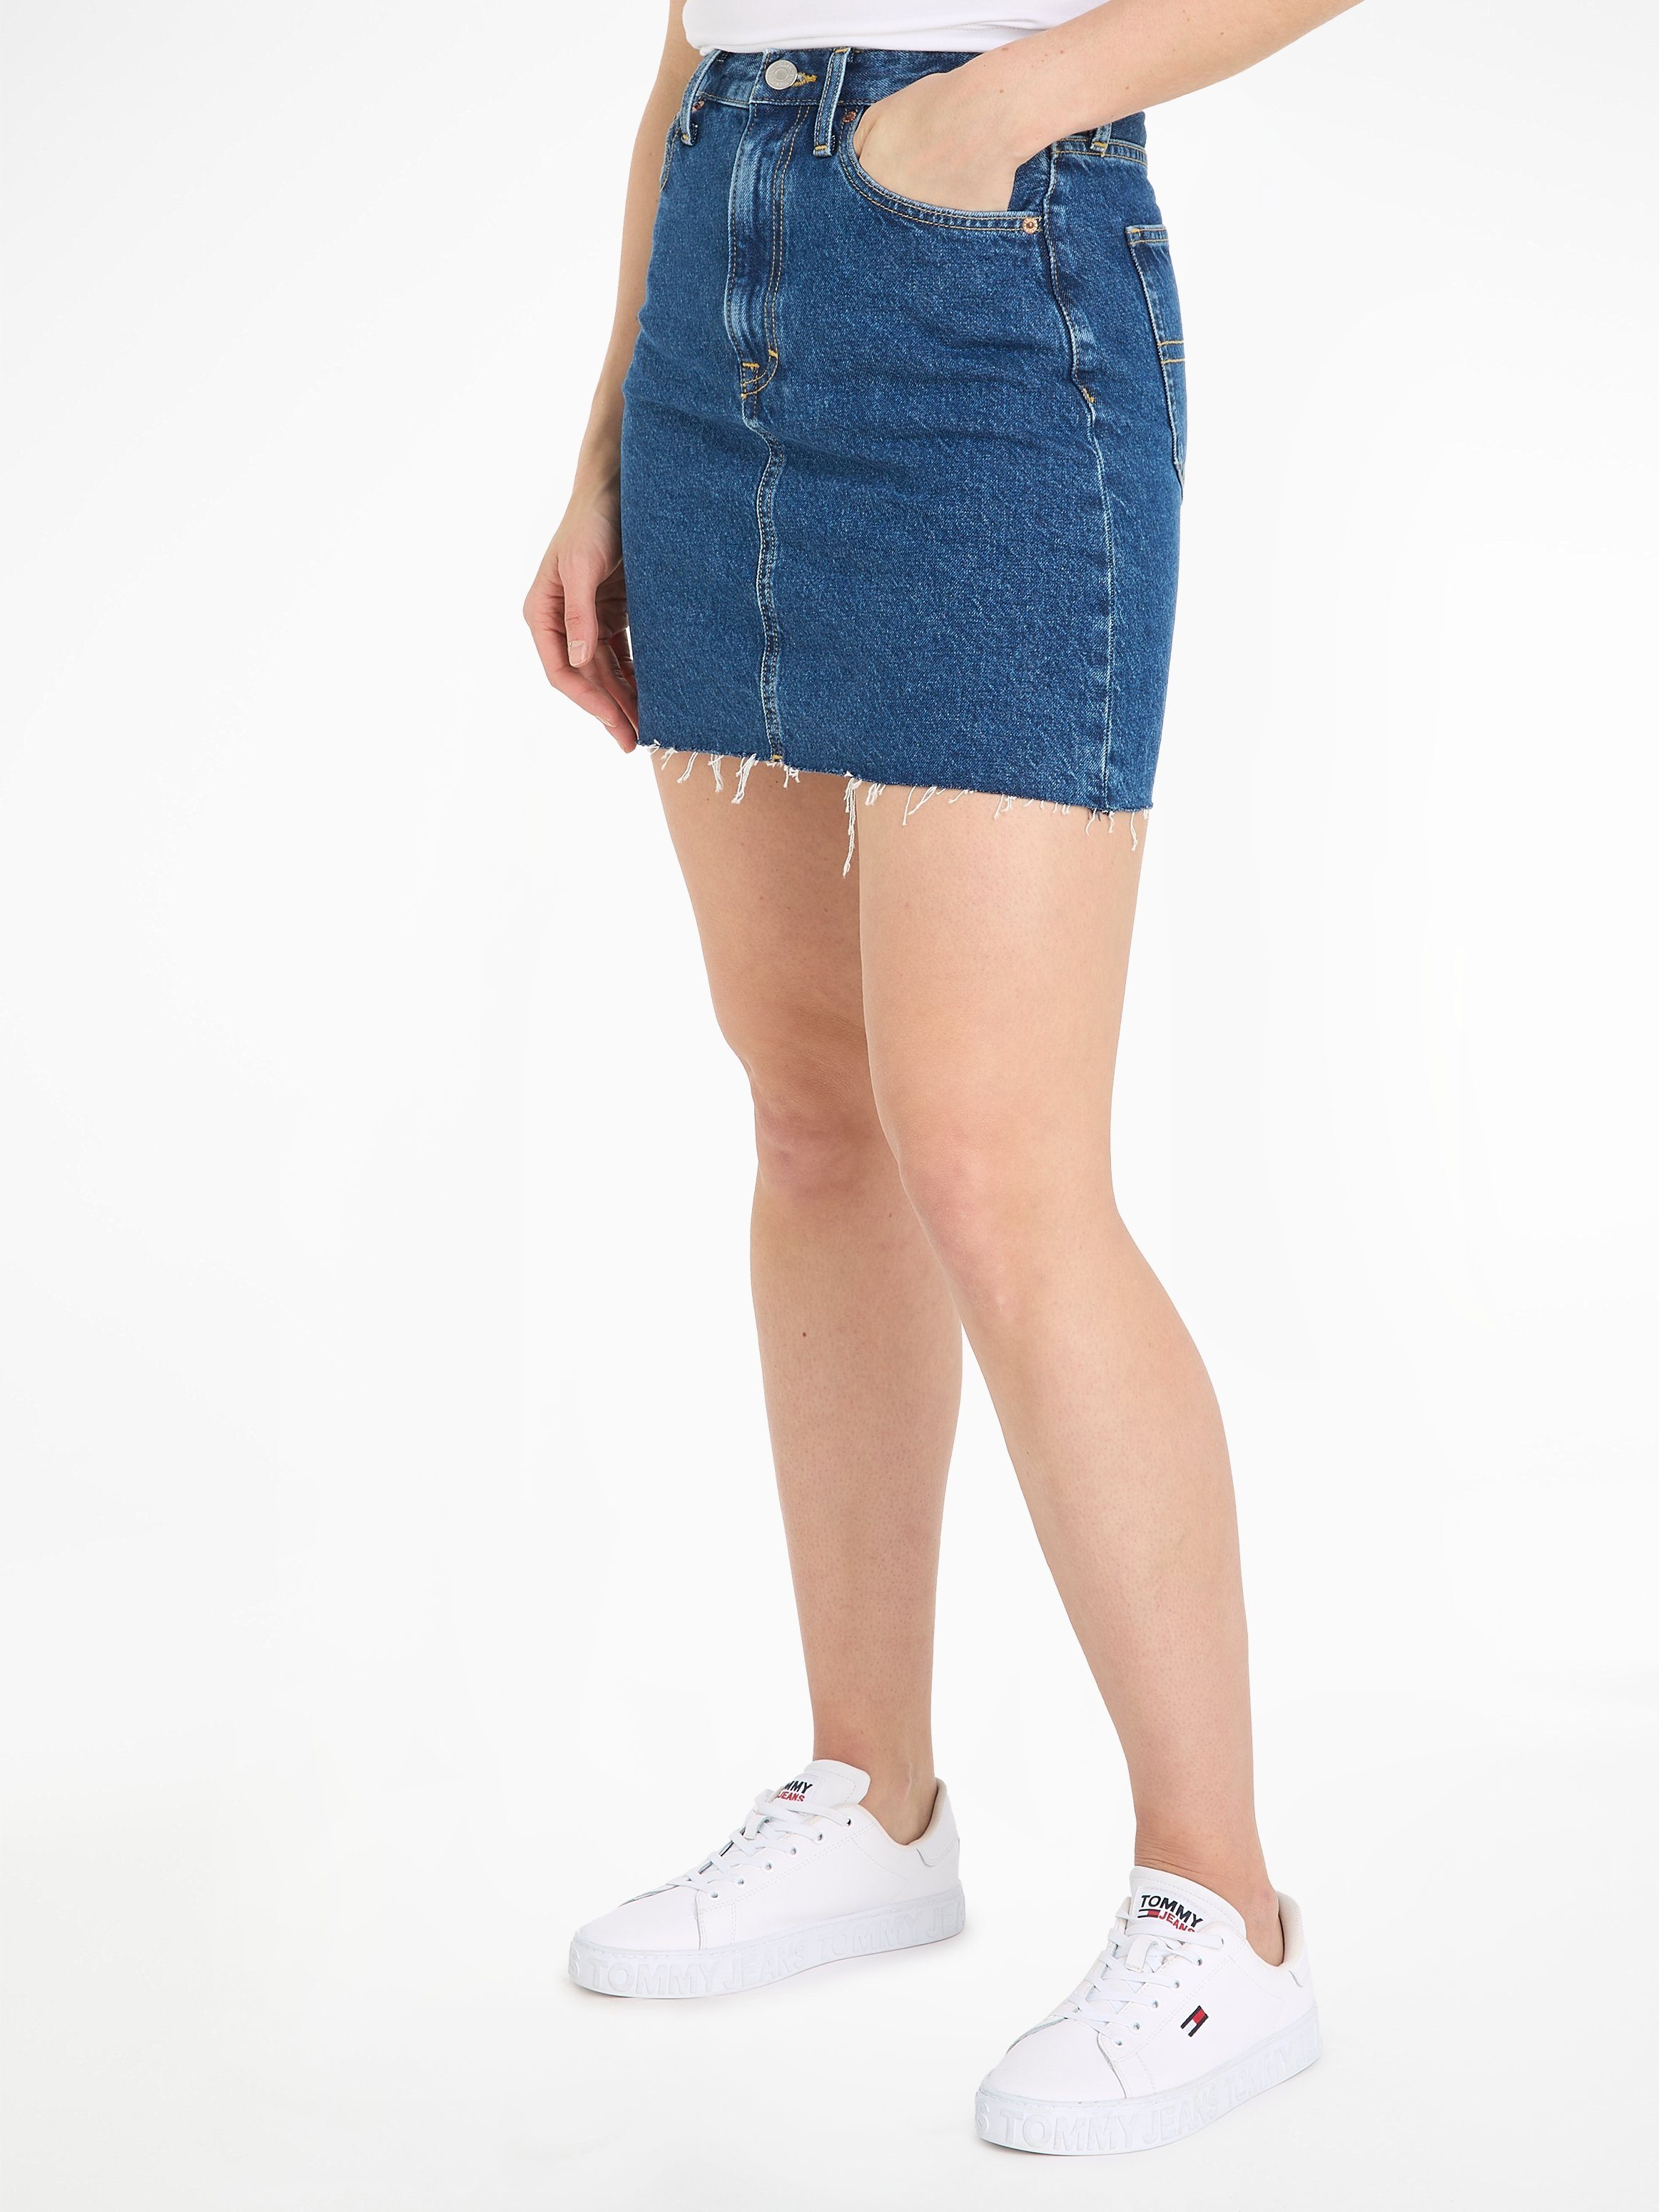 SKIRT Tommy Jeans Jeansrock UH mit AH4035 MOM Logostickerei